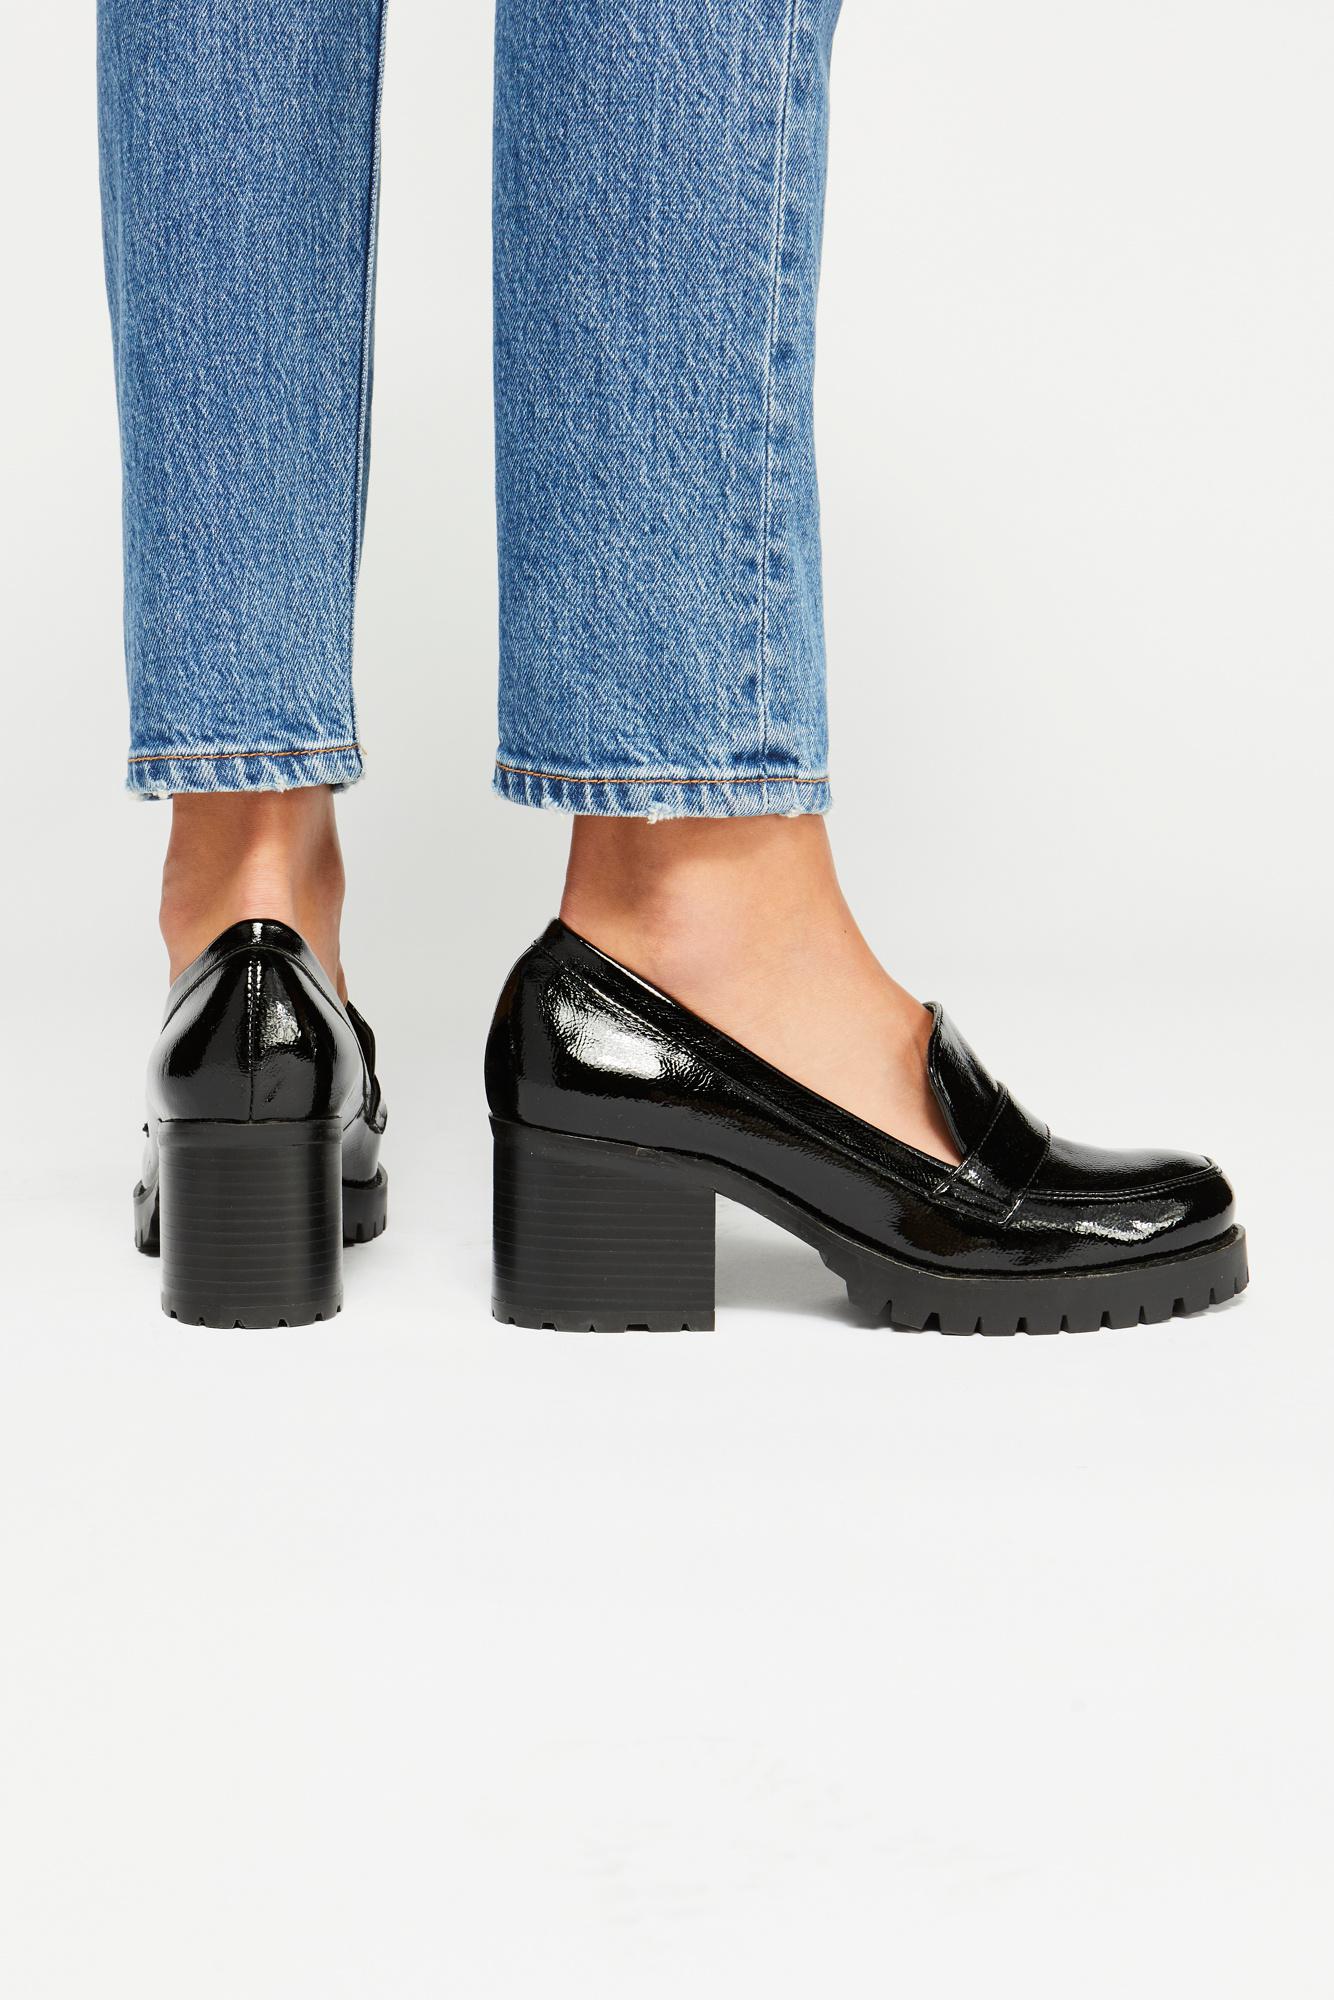 Free People Leather Lexden Block Heel Loafer By Jane & The Shoe in ...